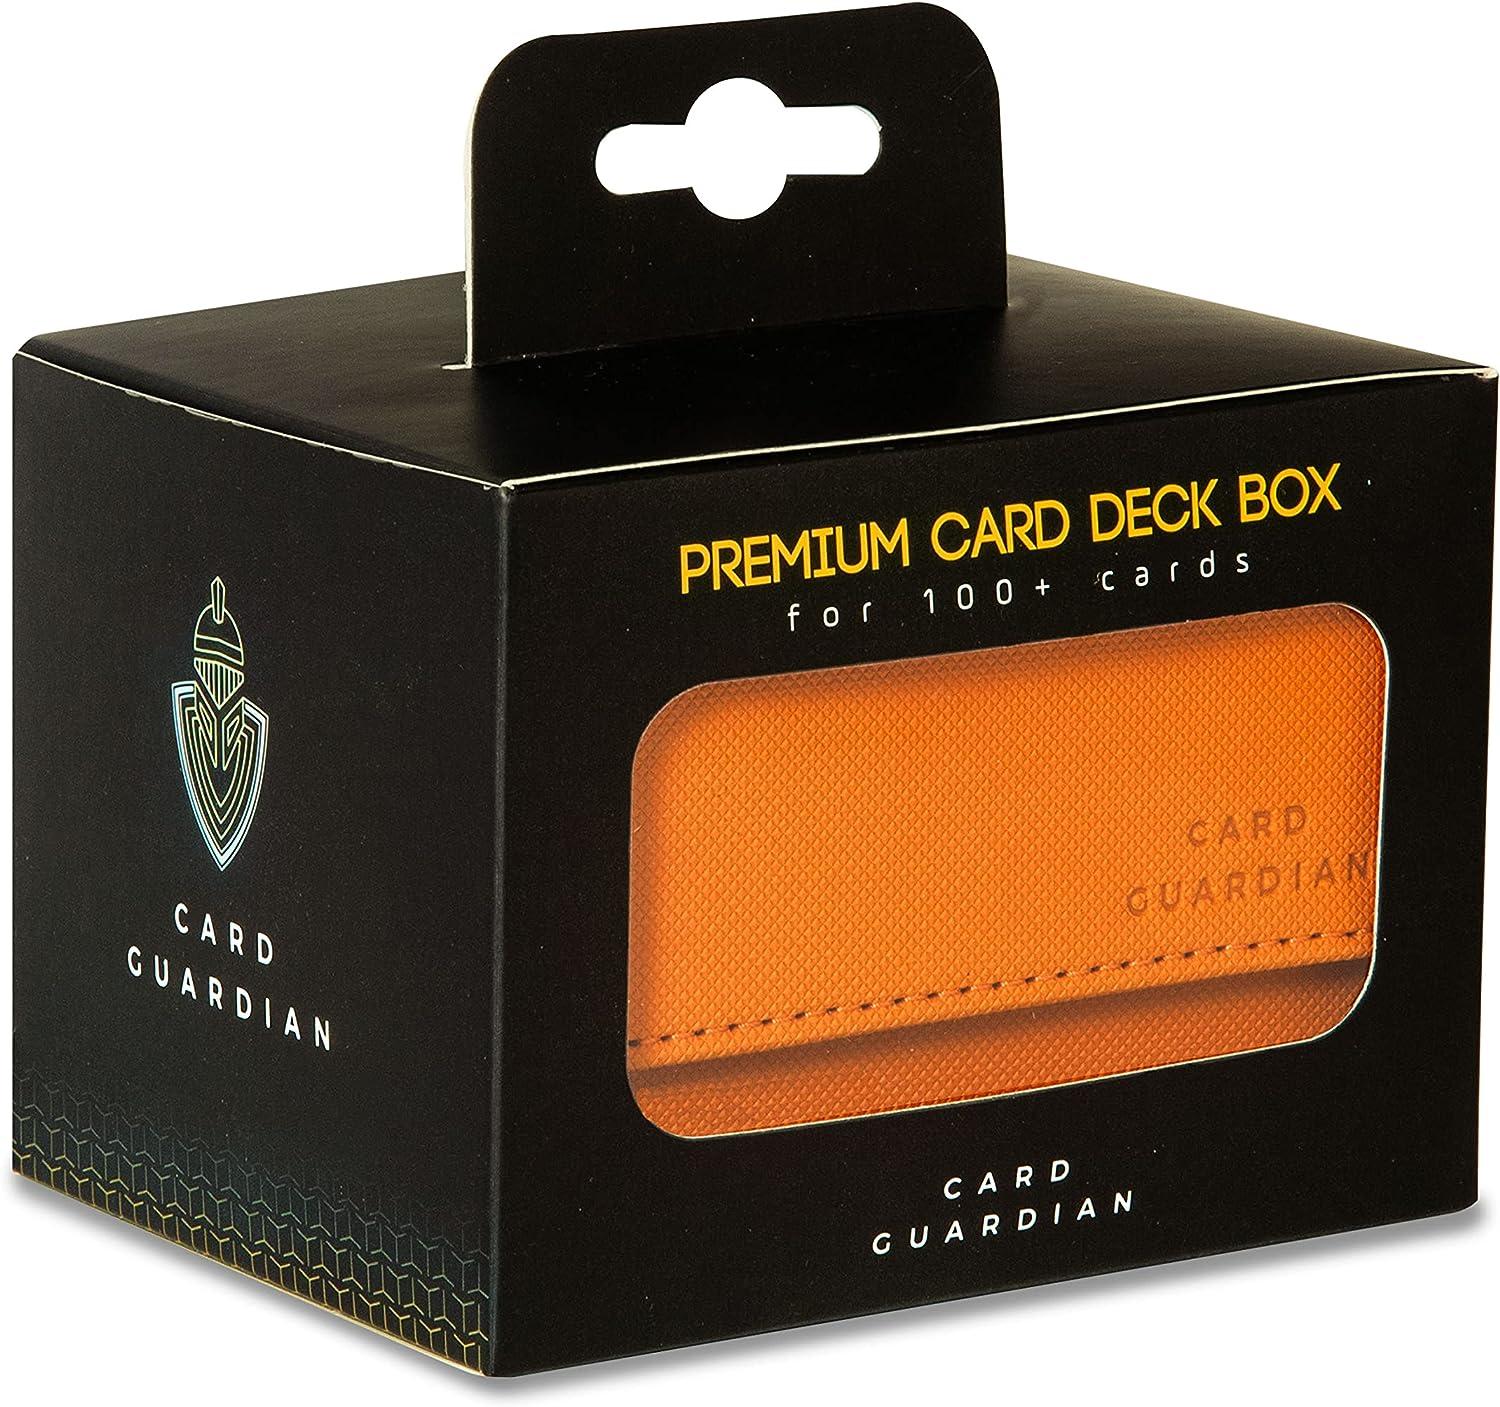 Card Guardian - Premium Deck Box (Green) for 100+ Cards for